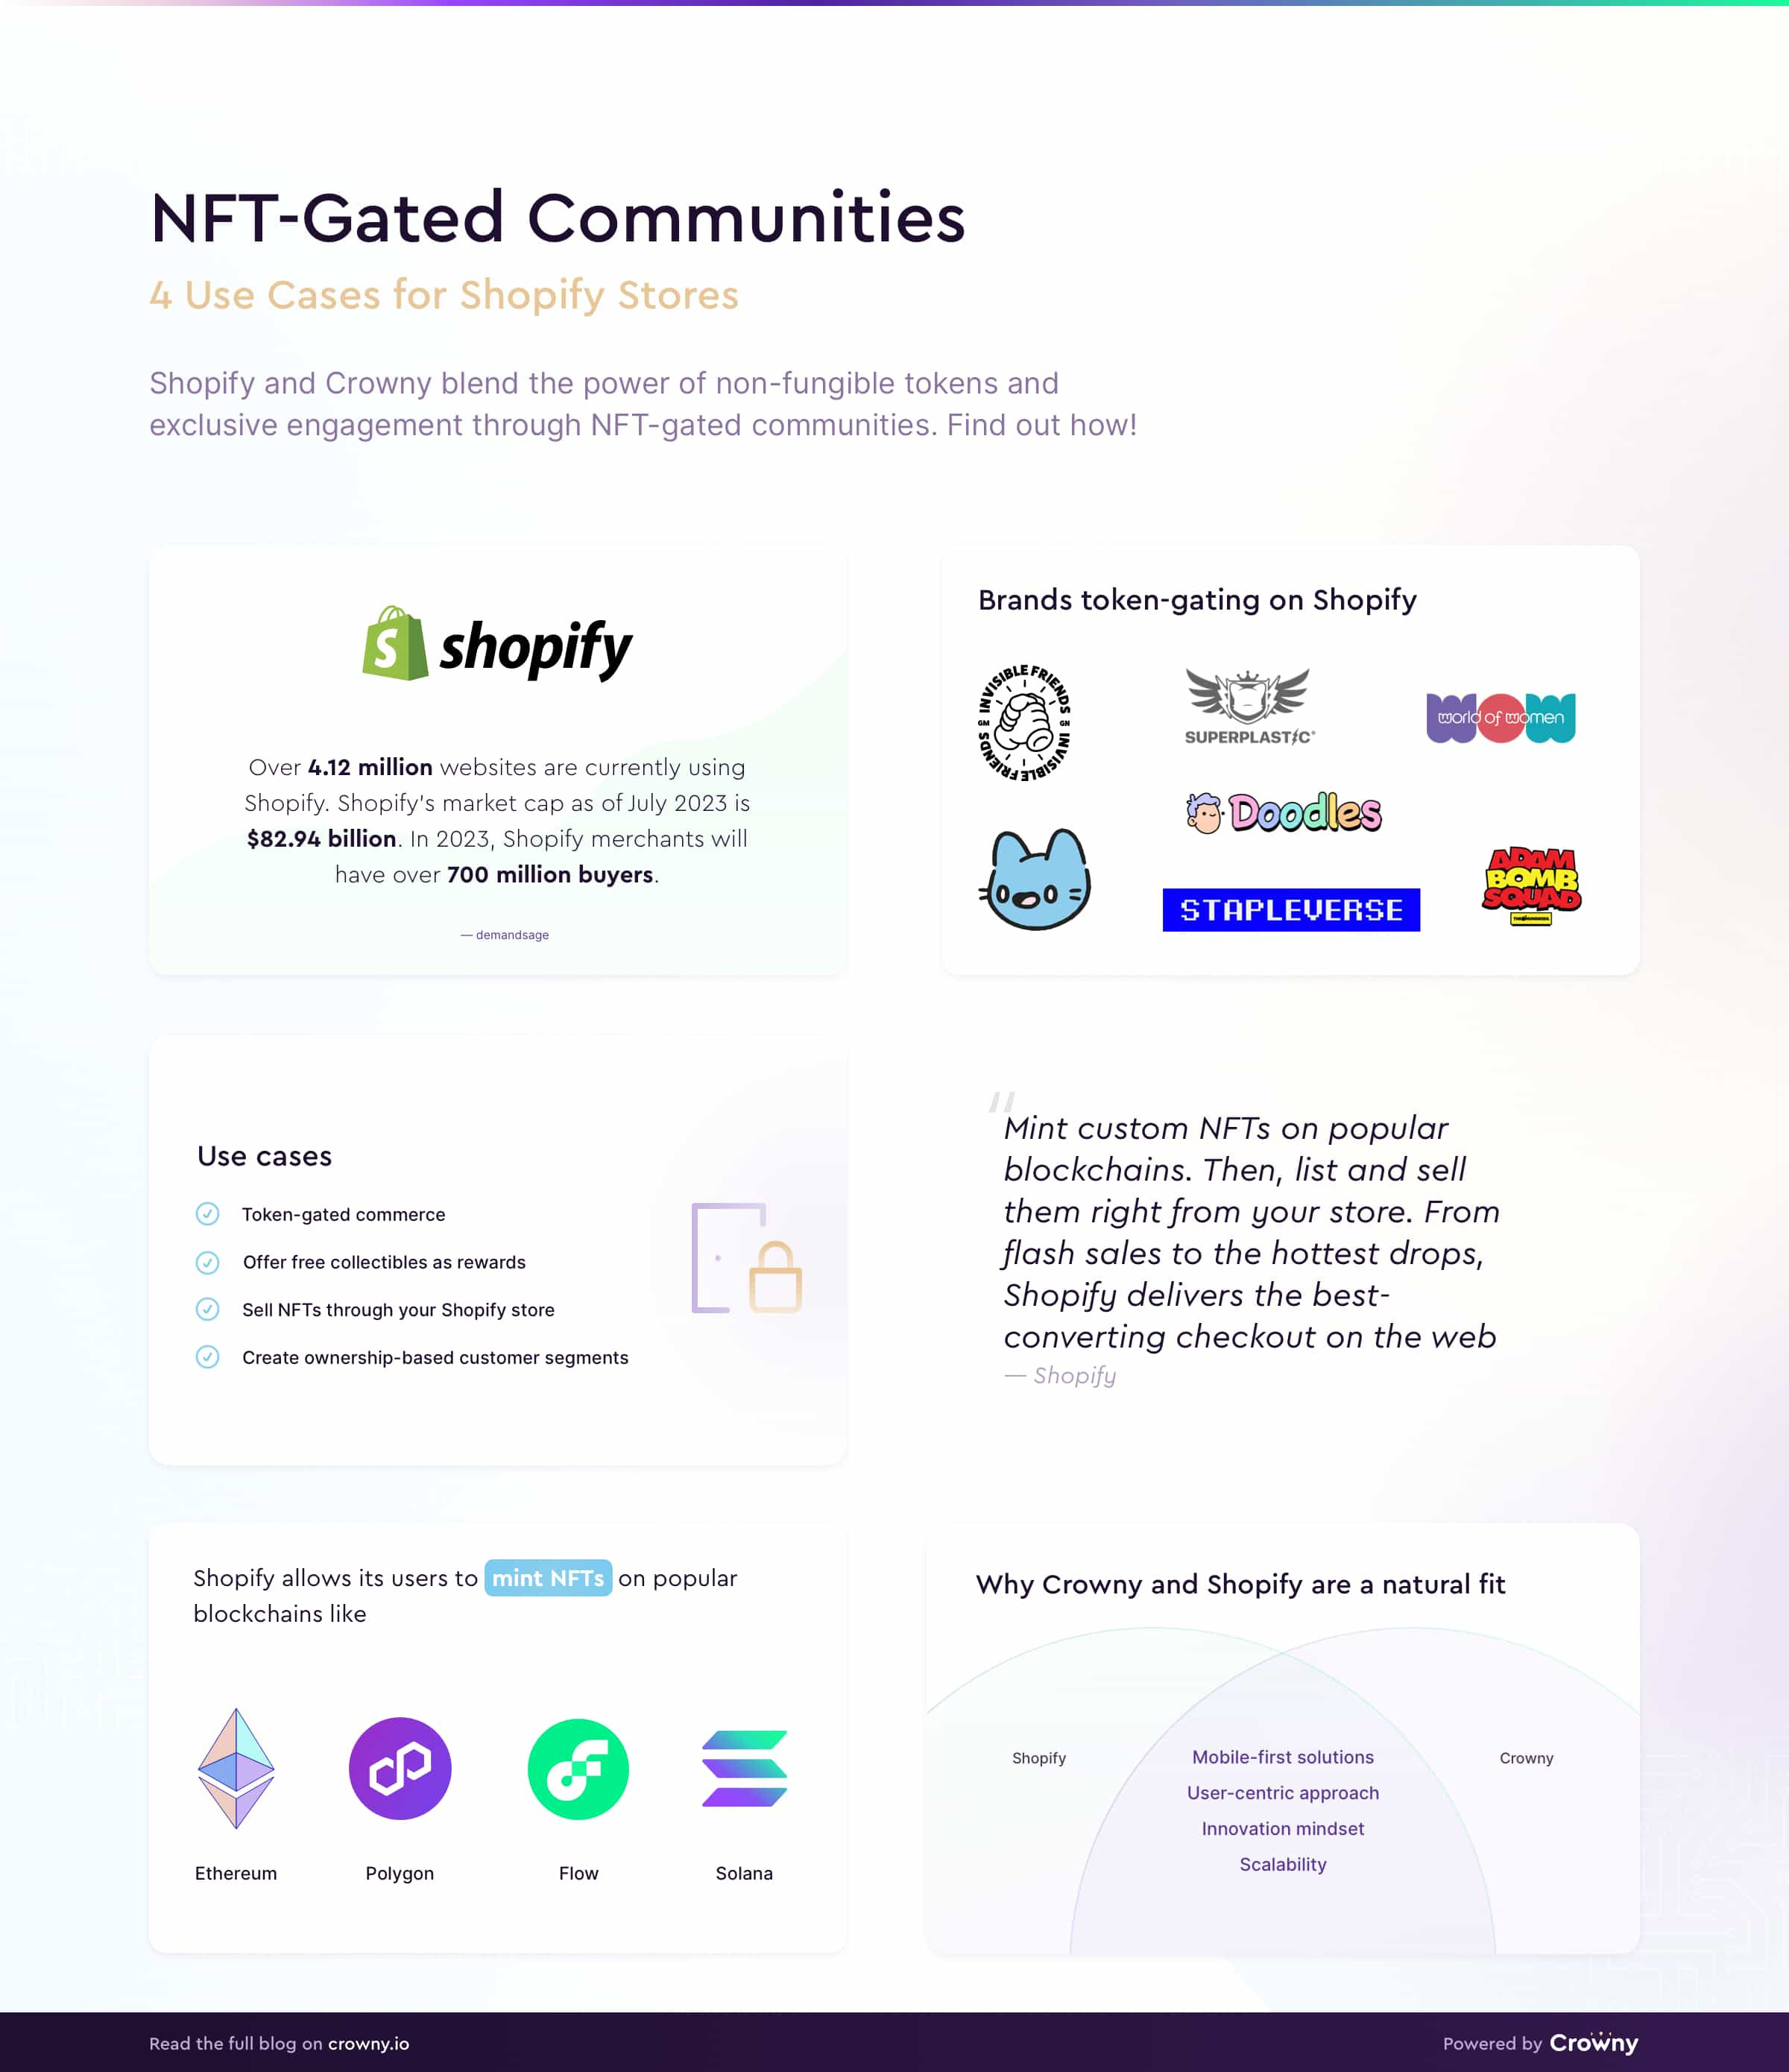 nft-gated communities on shopify infographic